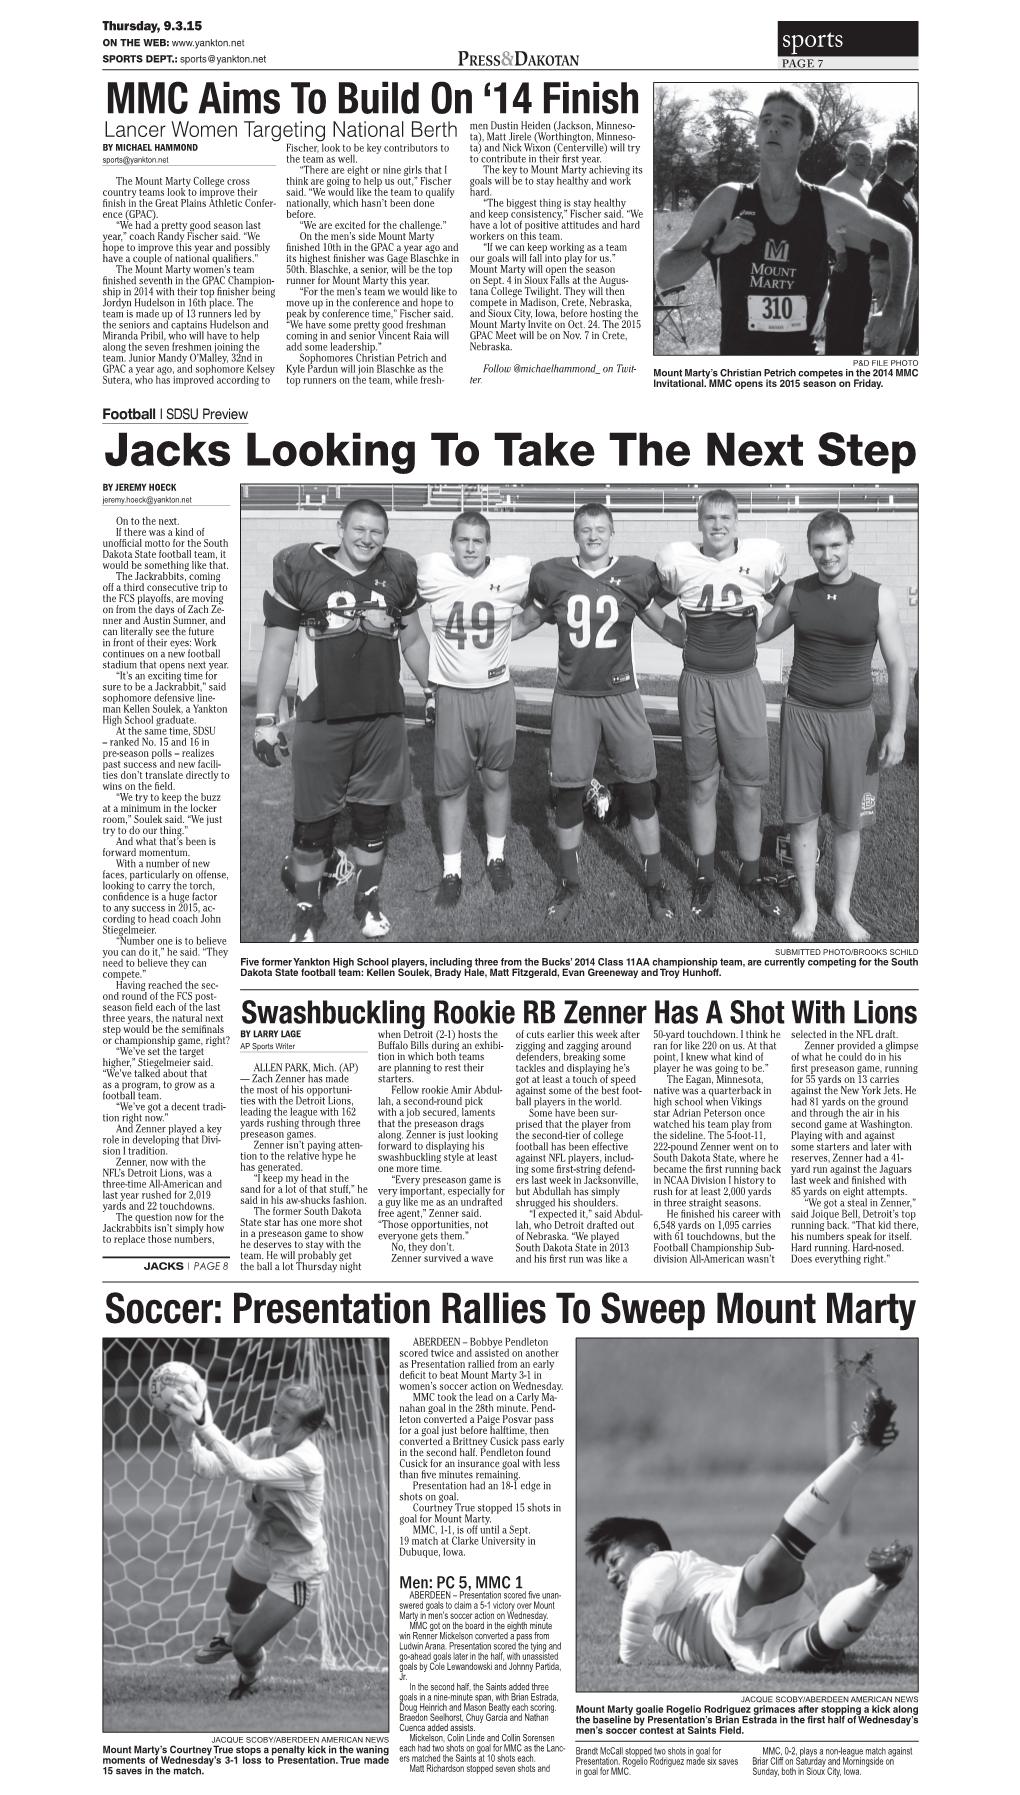 Jacks Looking to Take the Next Step by JEREMY HOECK Jeremy.Hoeck@Yankton.Net on to the Next